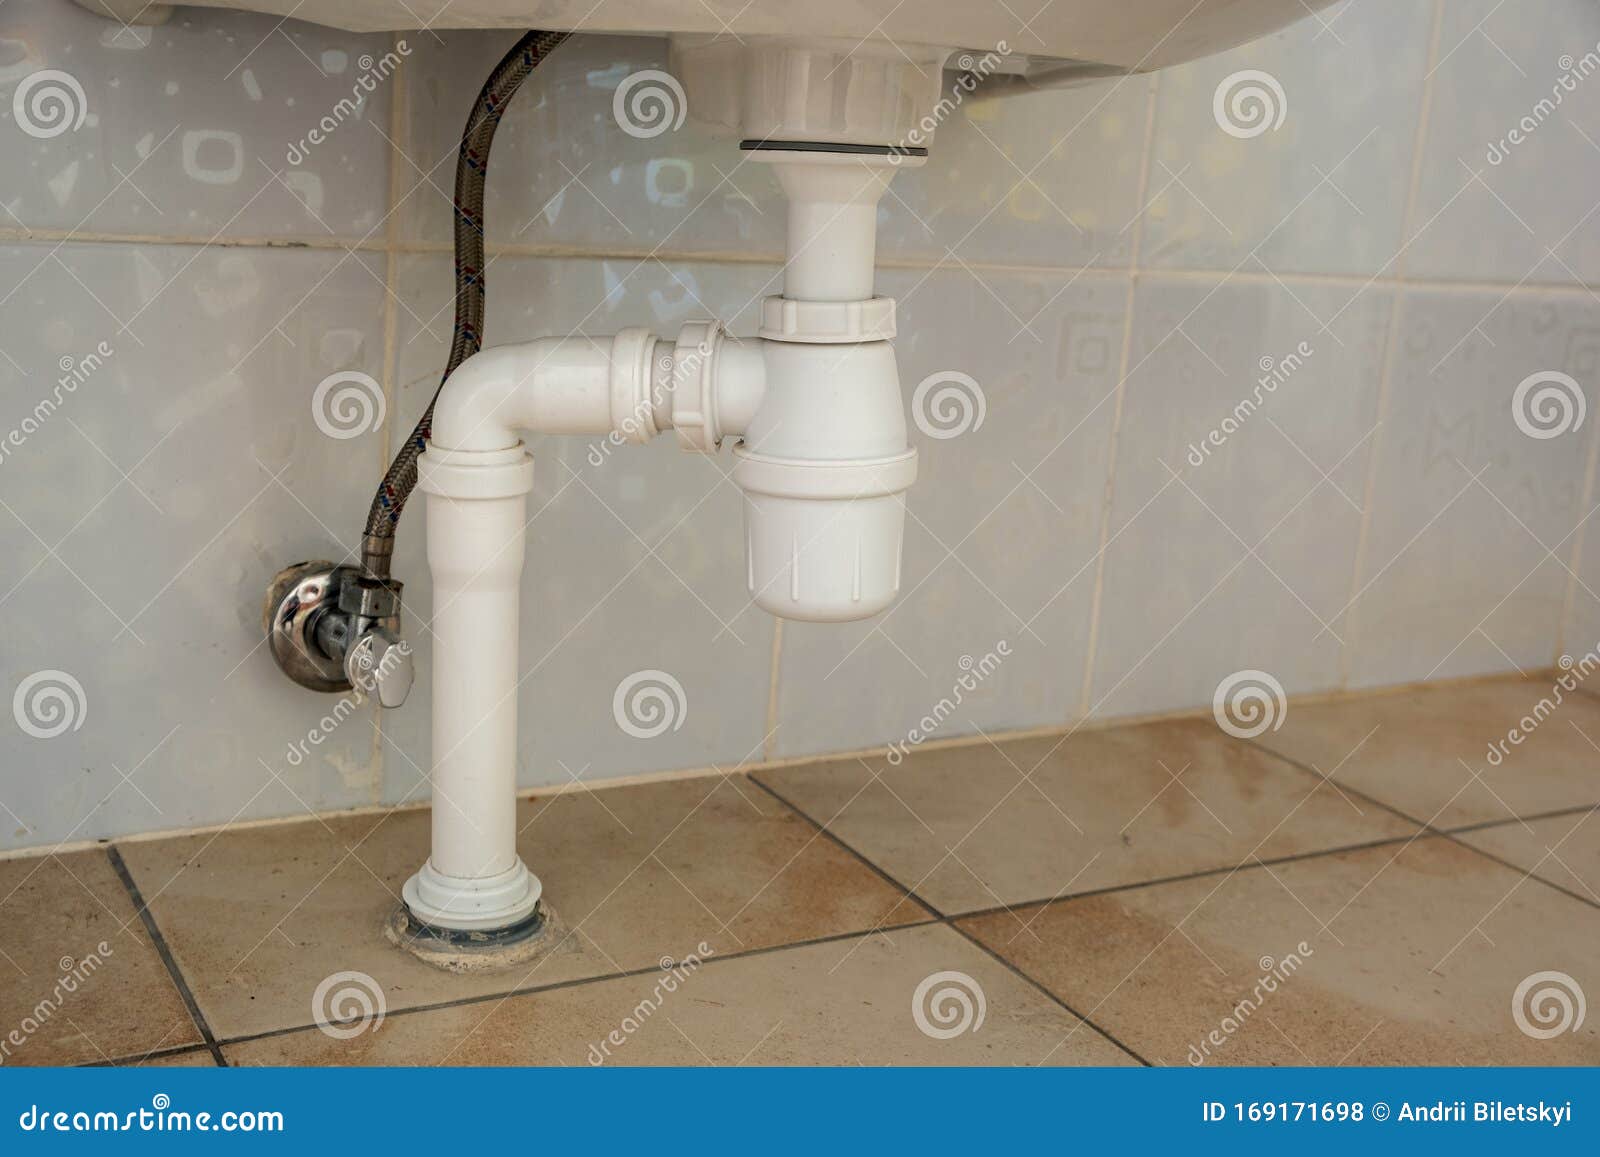 Close Up Of White Plastic Pipe Drain Under Washing Sink In Bathroom Stock Photo Image Of Equipment